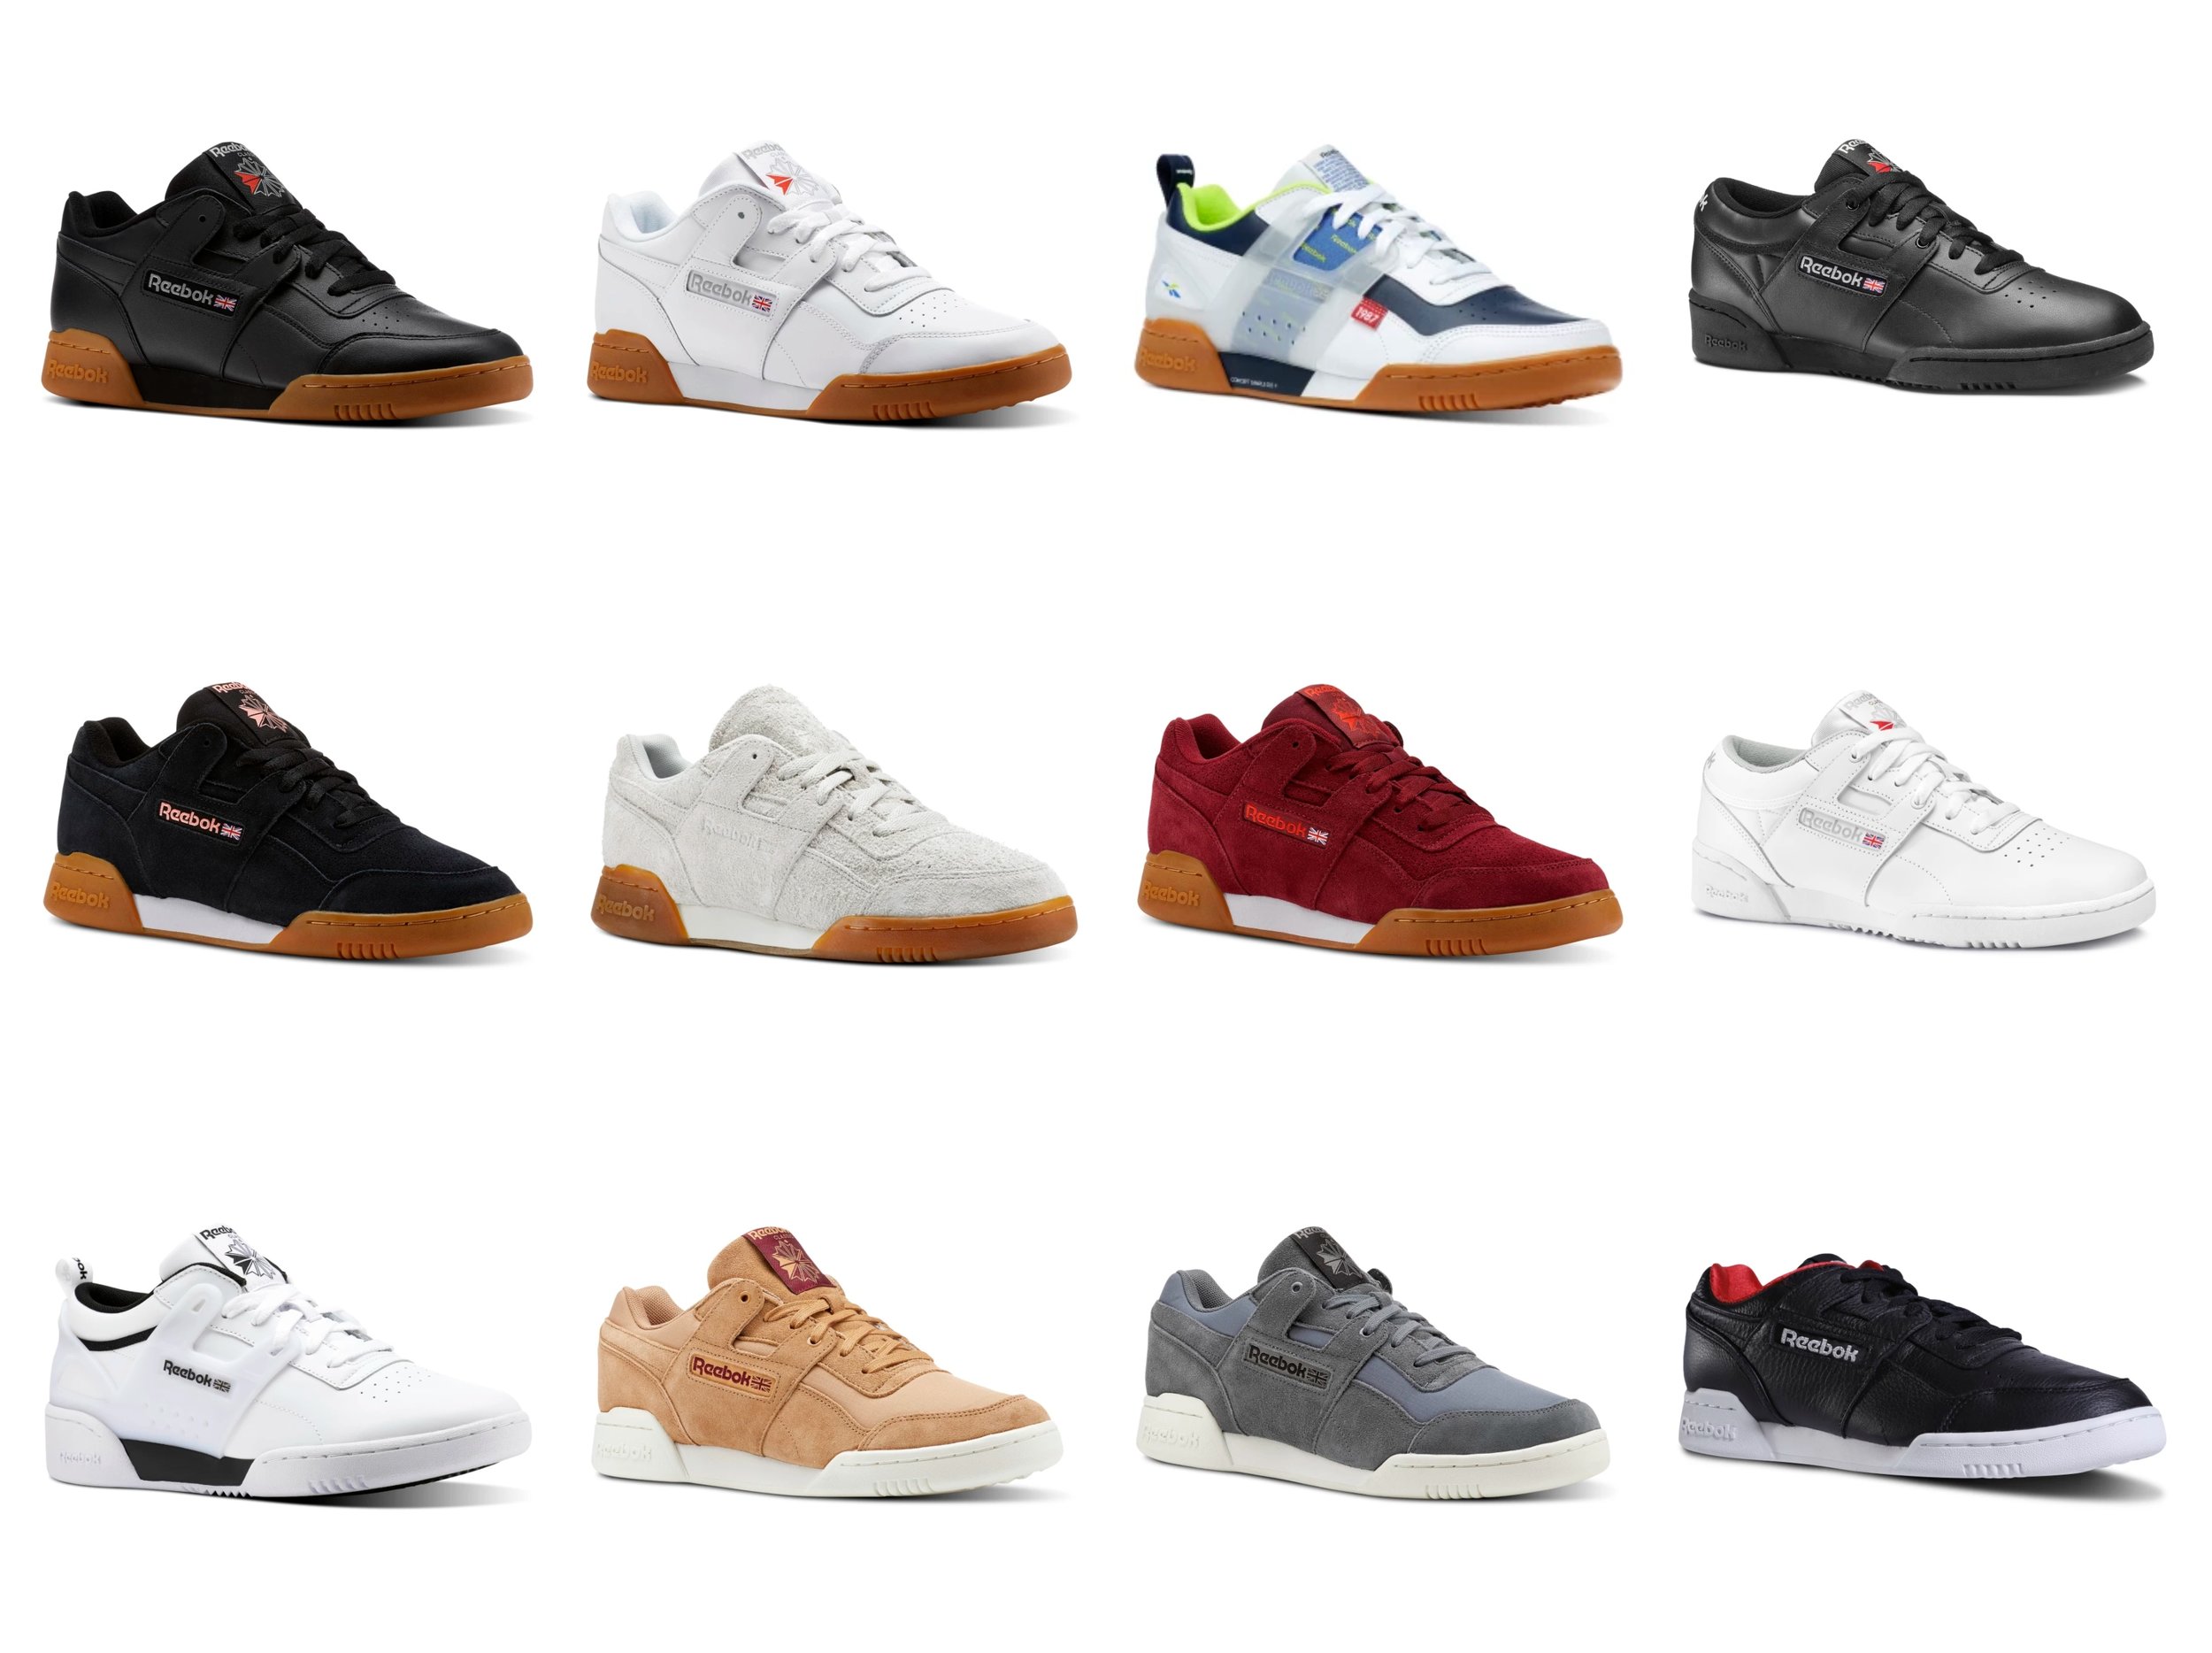 Flash Sale: Reebok Classic Workout only 